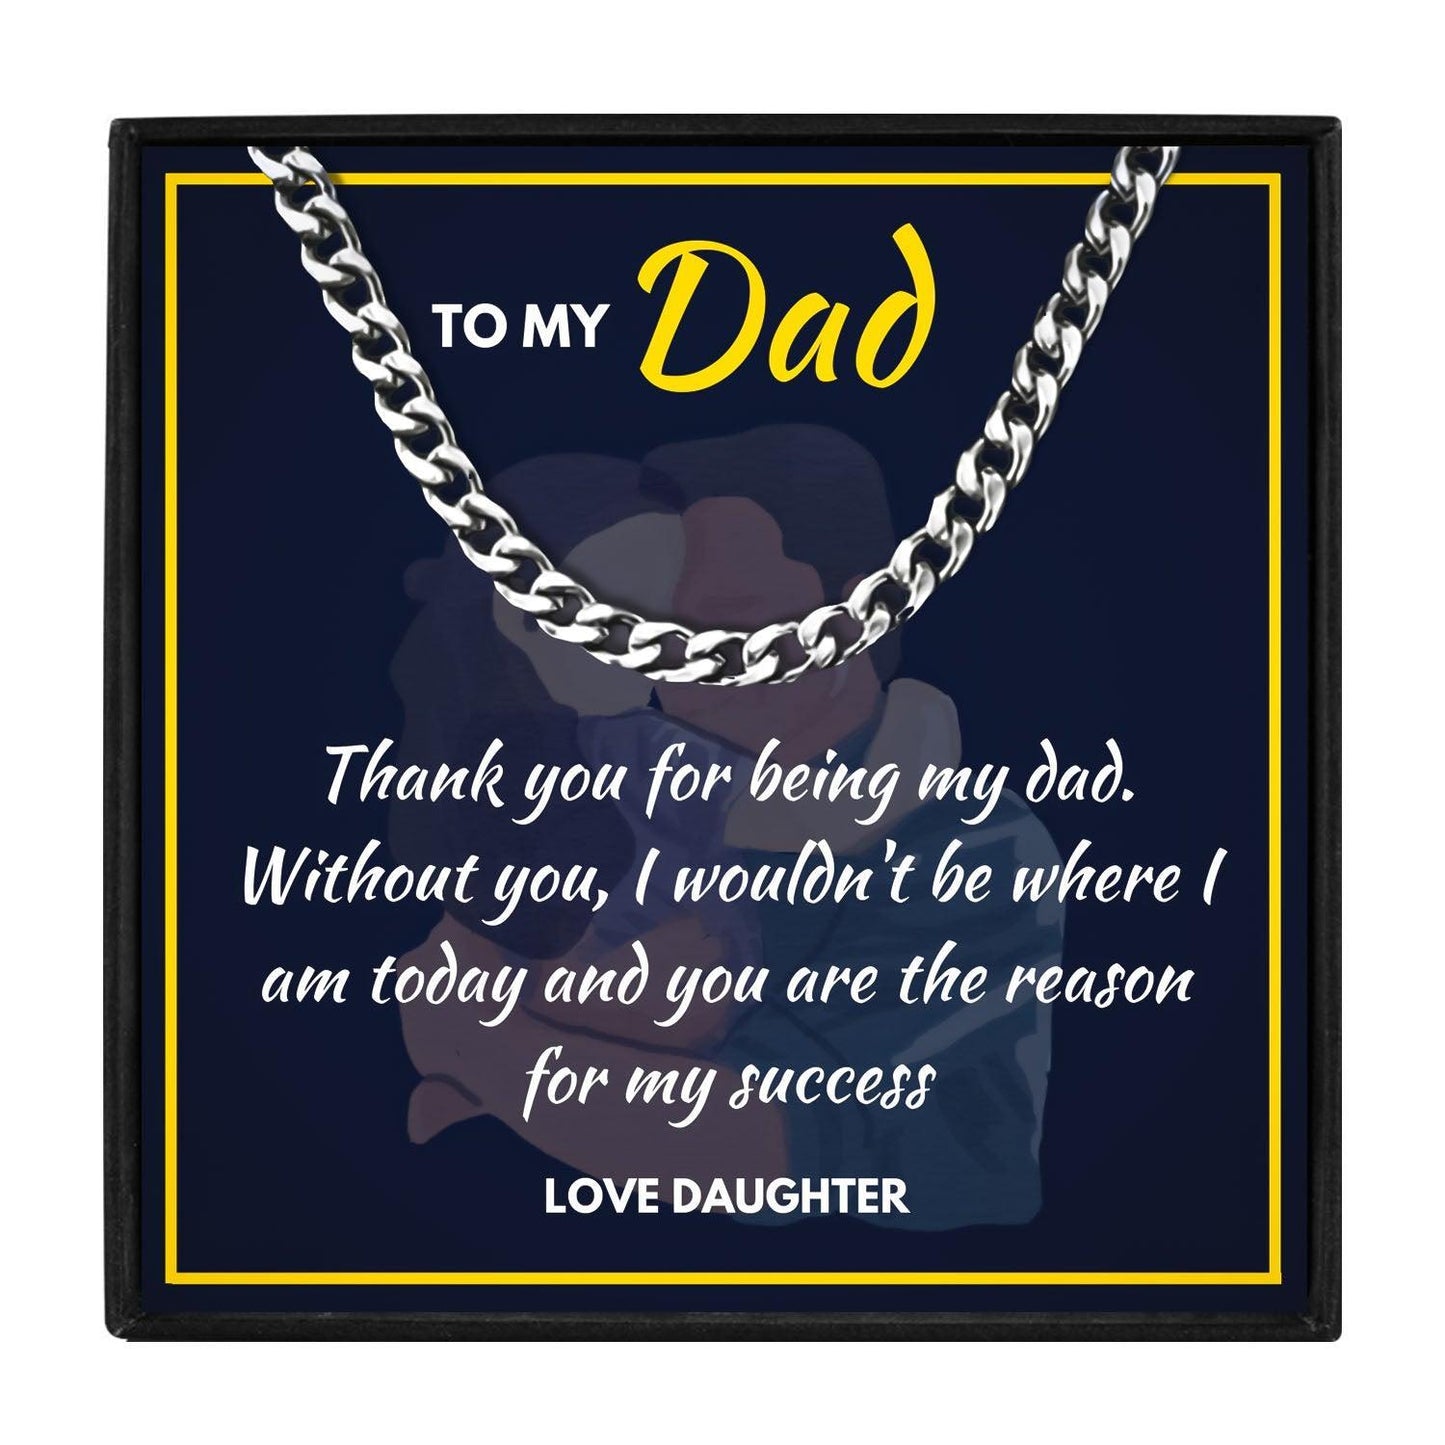 Dad Necklace Gift From Daughter in 2023 | Dad Necklace Gift From Daughter - undefined | dad birthday gift, dad necklace from daughte, dad necklaces, dad pendant, father daughter necklace, father's day necklace | From Hunny Life | hunnylife.com